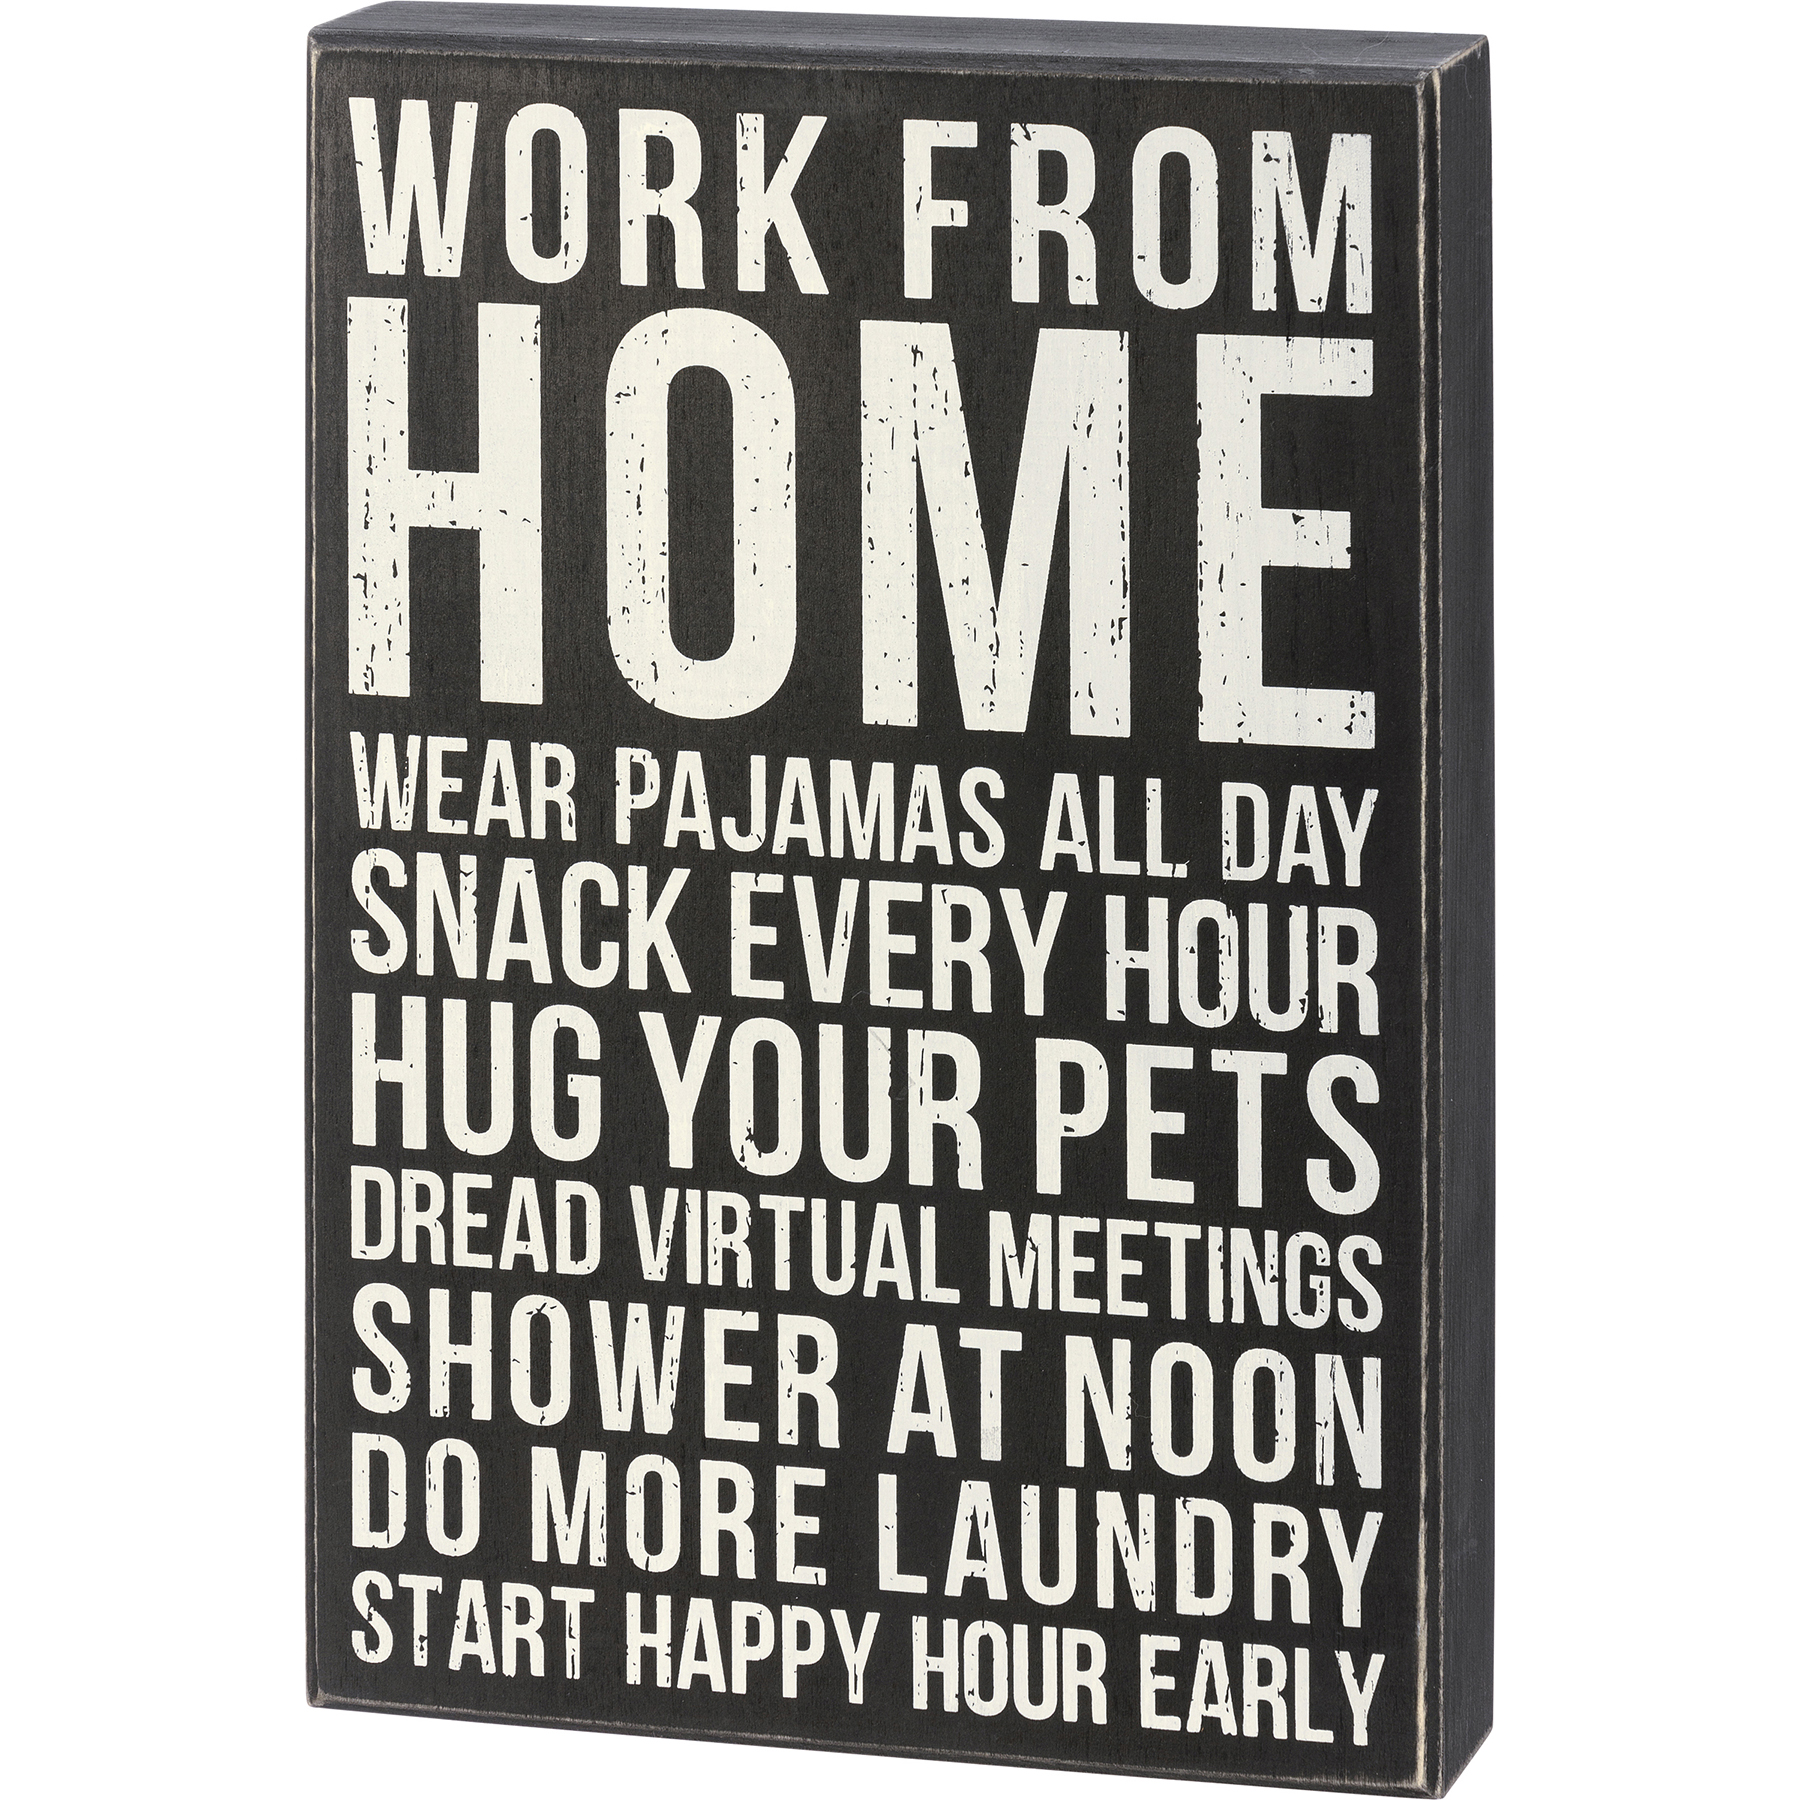 Work From Home Must Haves I Use Every Single Day - All for the